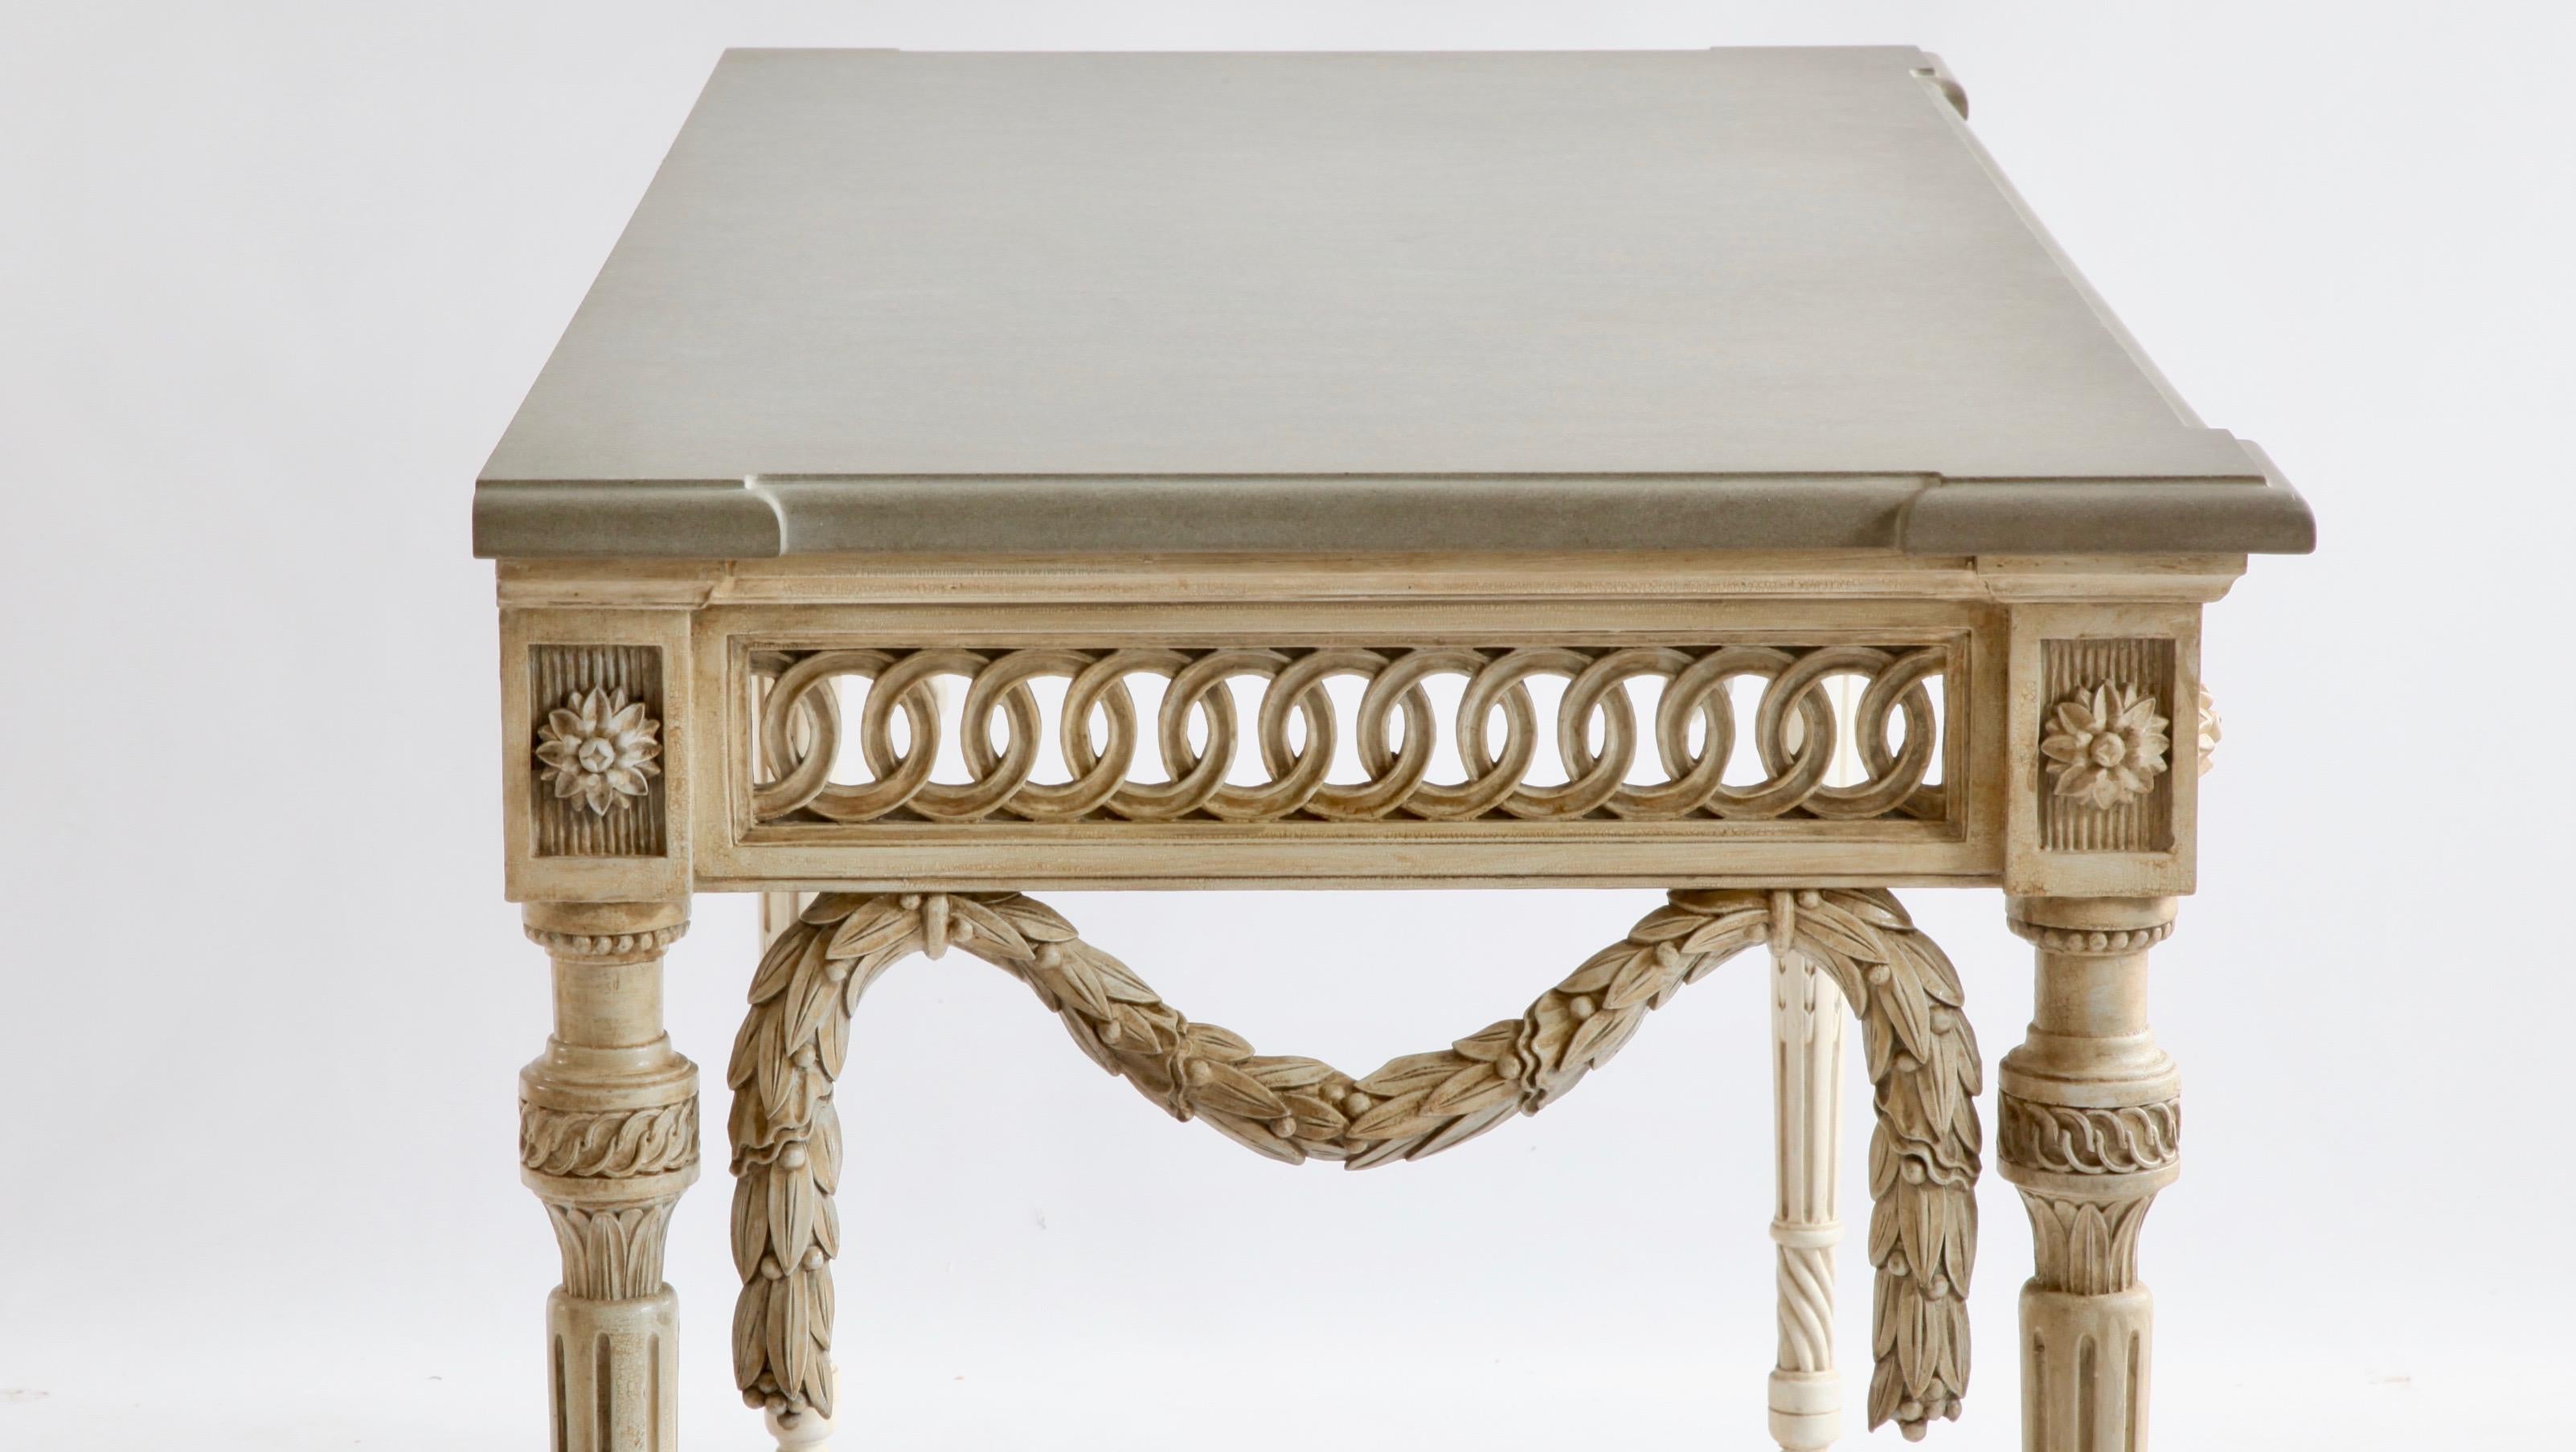 Hand-Carved Louis XVI Style Console Table Hand Carved in Wood and Finished in French Grey